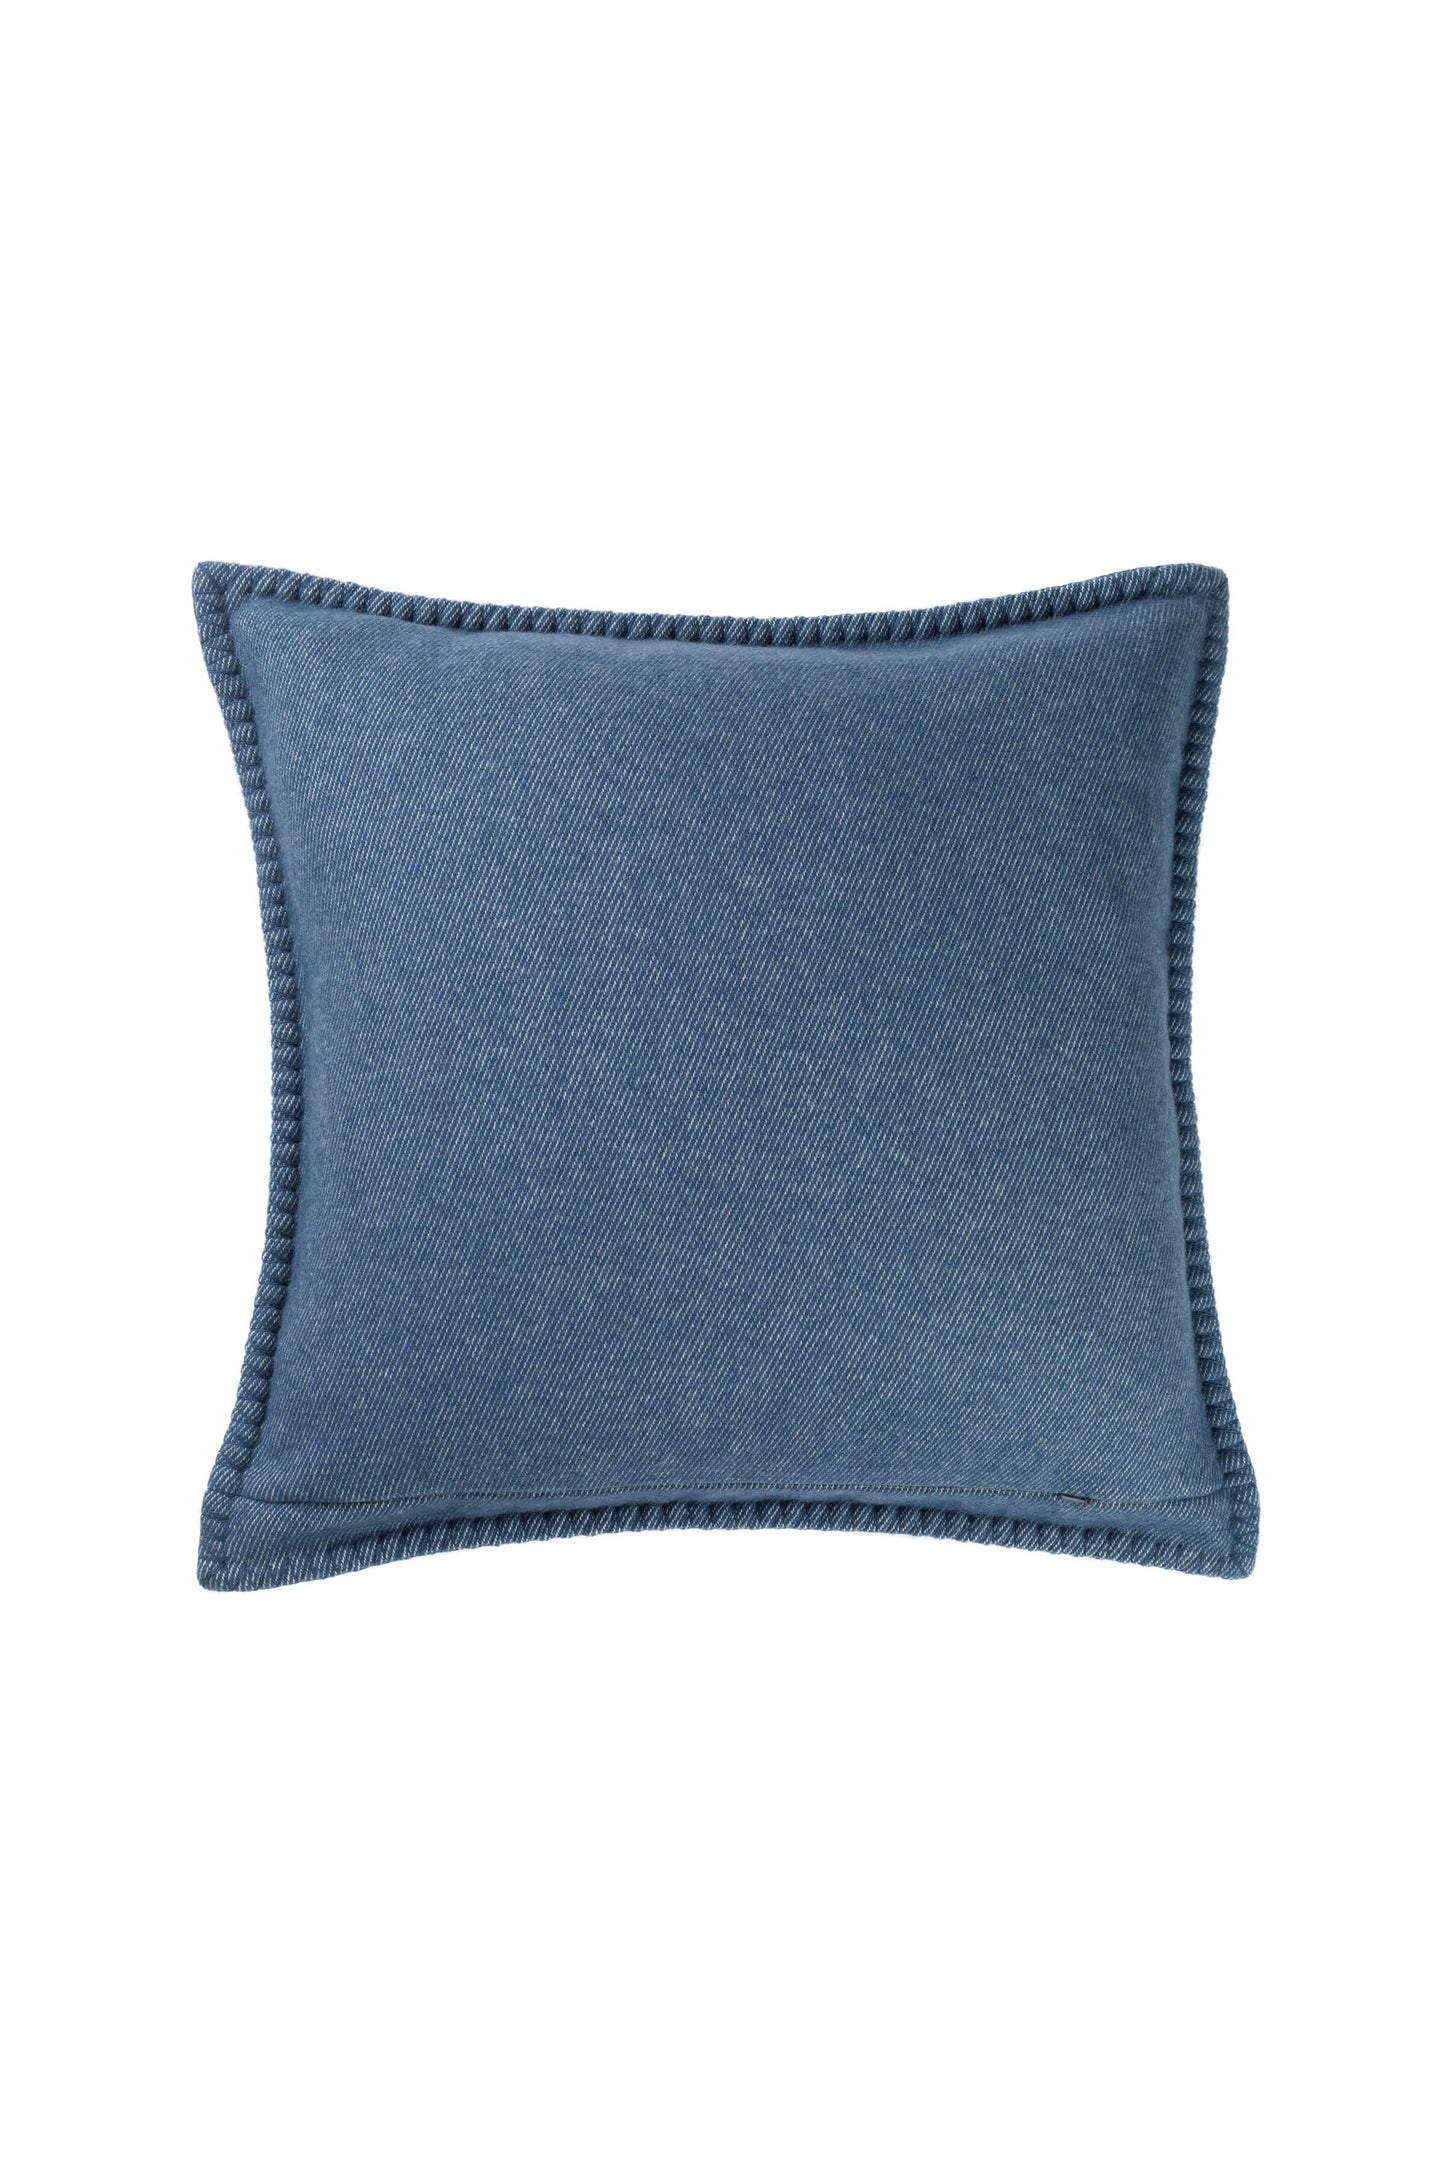 Johnstons of Elgin 2024 Home Collection Sapphire & White Blanket Stitched Basketweave Cushion PB000059RU7448ONE